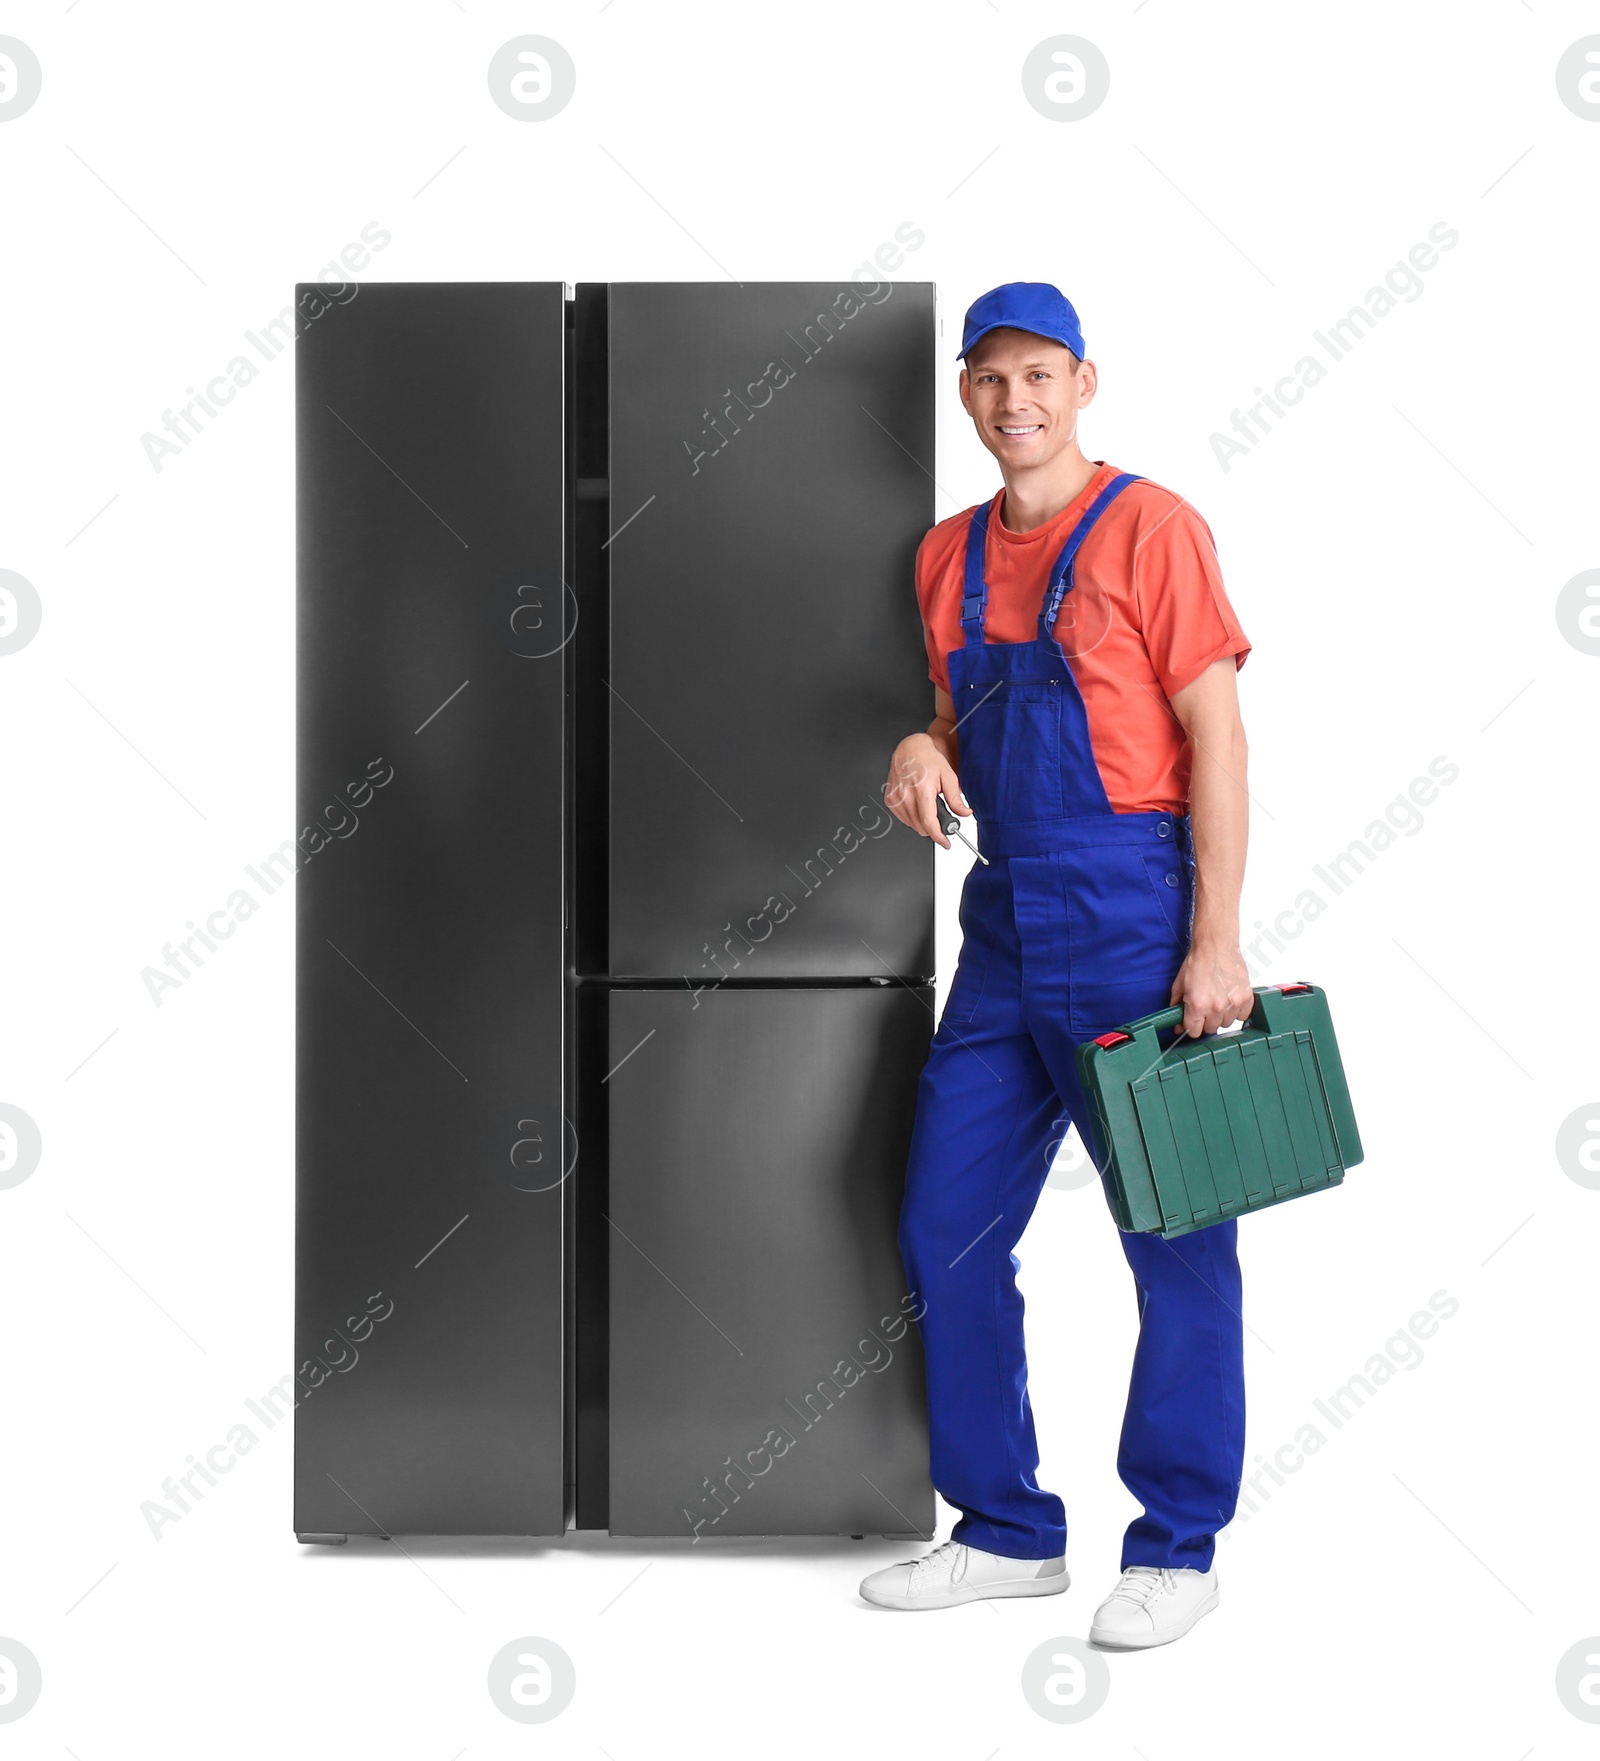 Photo of Male technician with tool box near refrigerator on white background